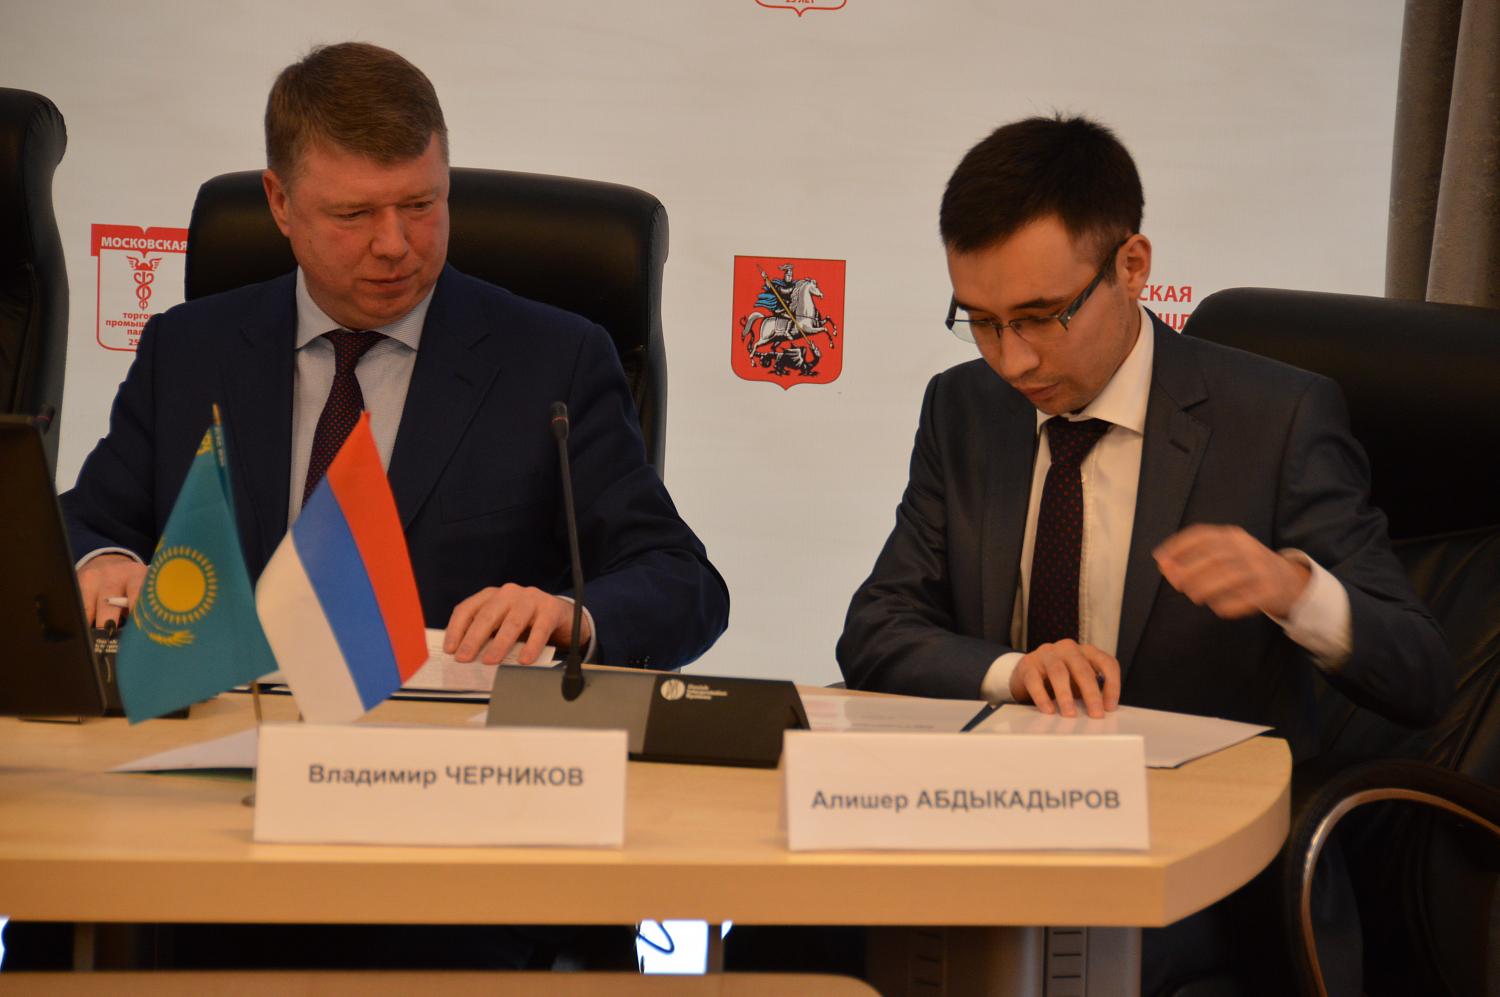 Business Cooperation Forum for Moscow and Astana was held at the MCCI.